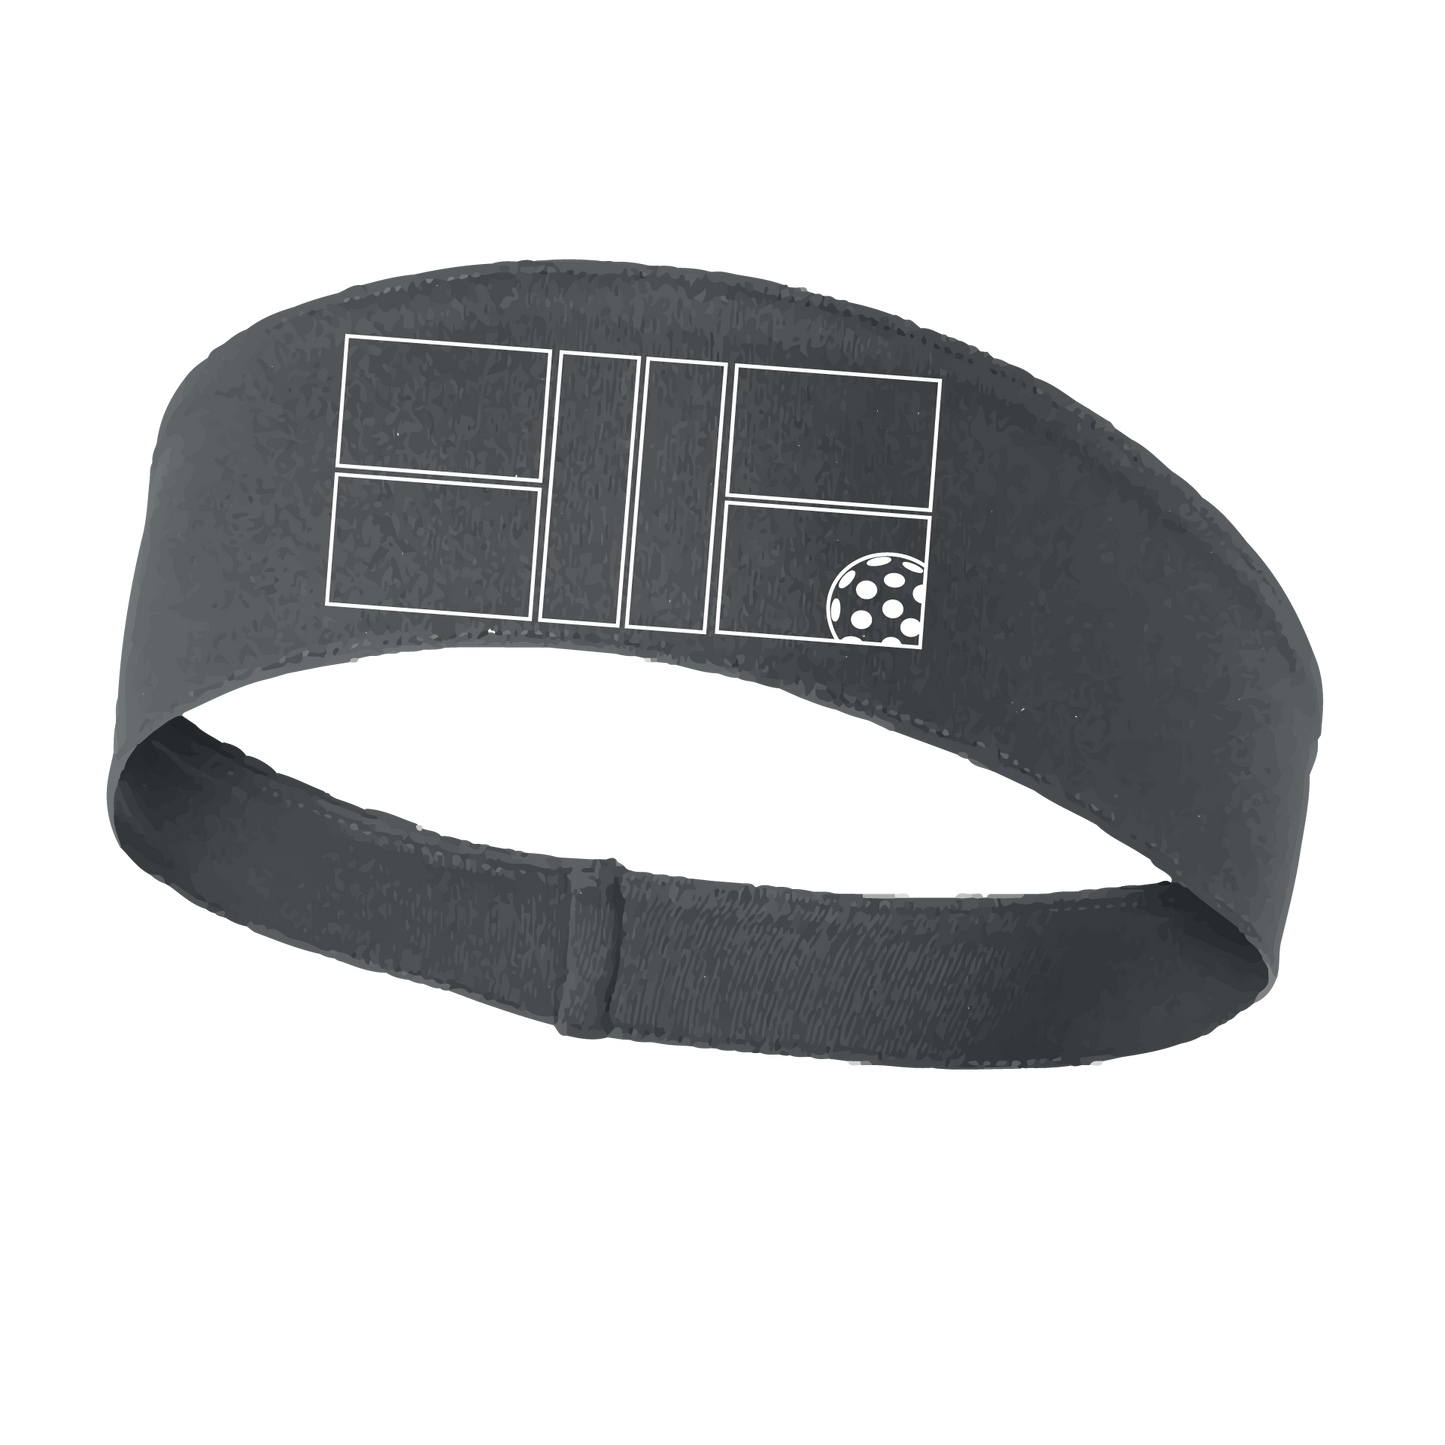 Pickleball Design: Pickleball Court with Corner Ball in White  This fun, pickleball designed, moisture-wicking headband narrows in the back to fit more securely. Single-needle top-stitched edging. These headbands come in a variety of colors. Truly shows your love for the sport of pickleball!!